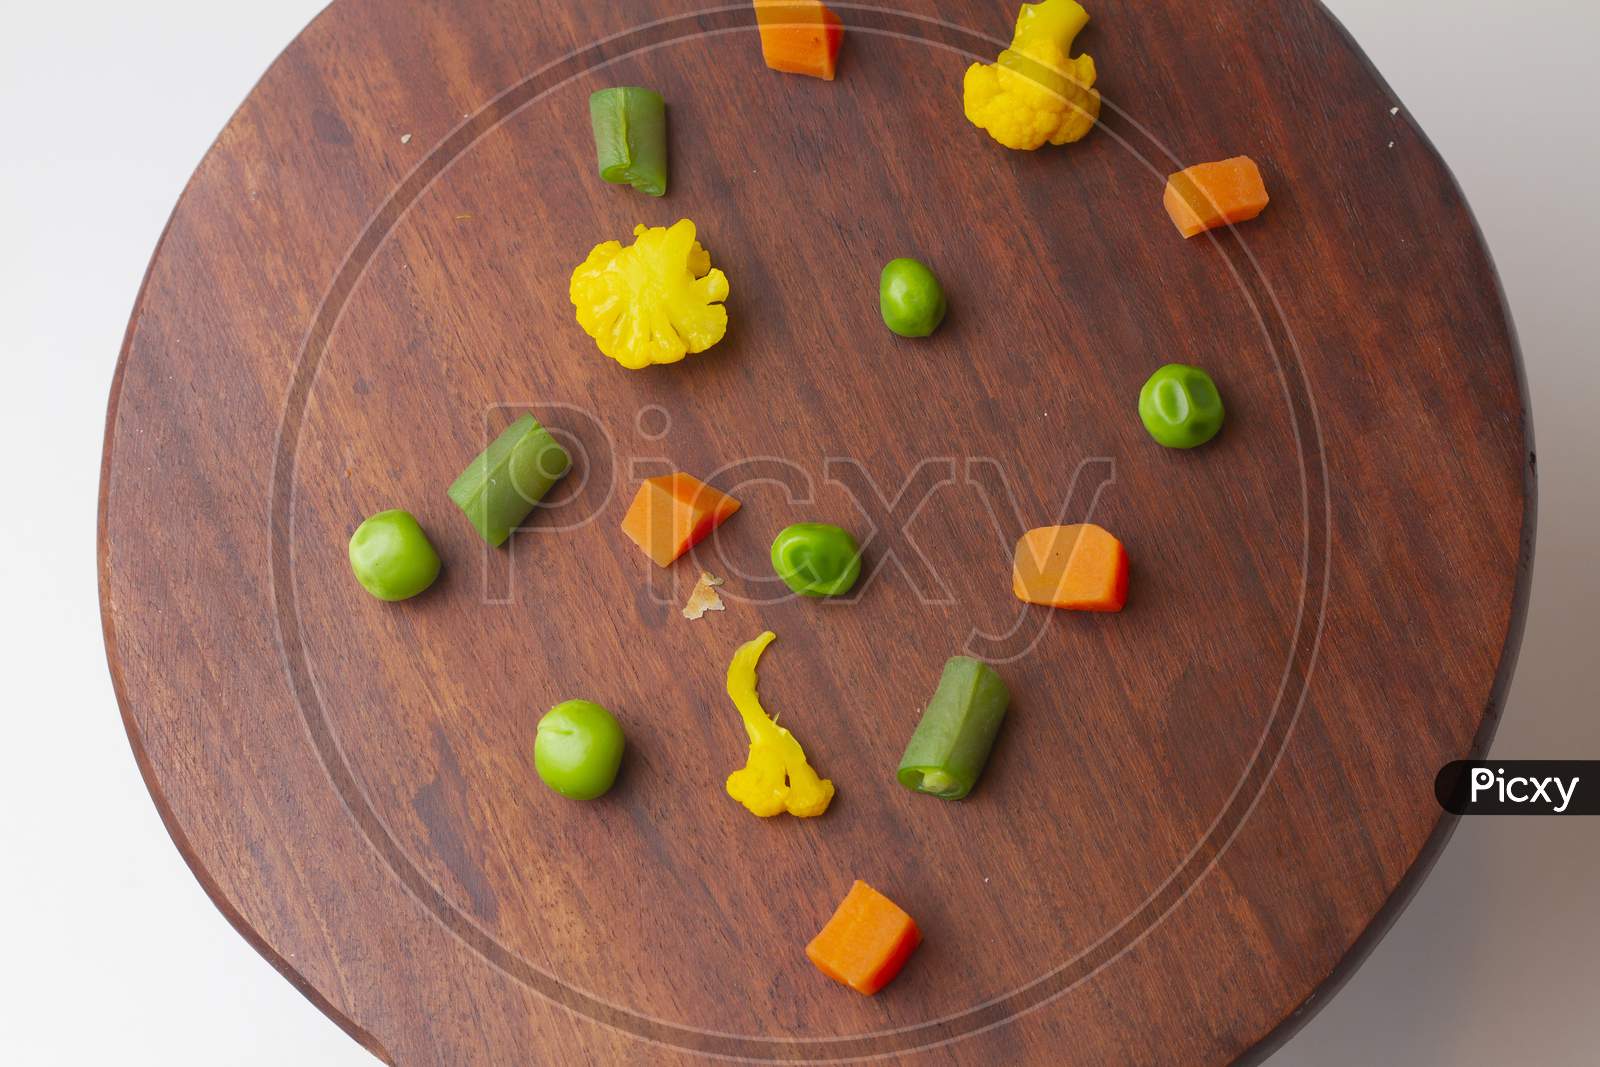 Top Of View Mixed Vegetable Carrot Broccoli And Cauliflower In Bowl On Wooden Background.